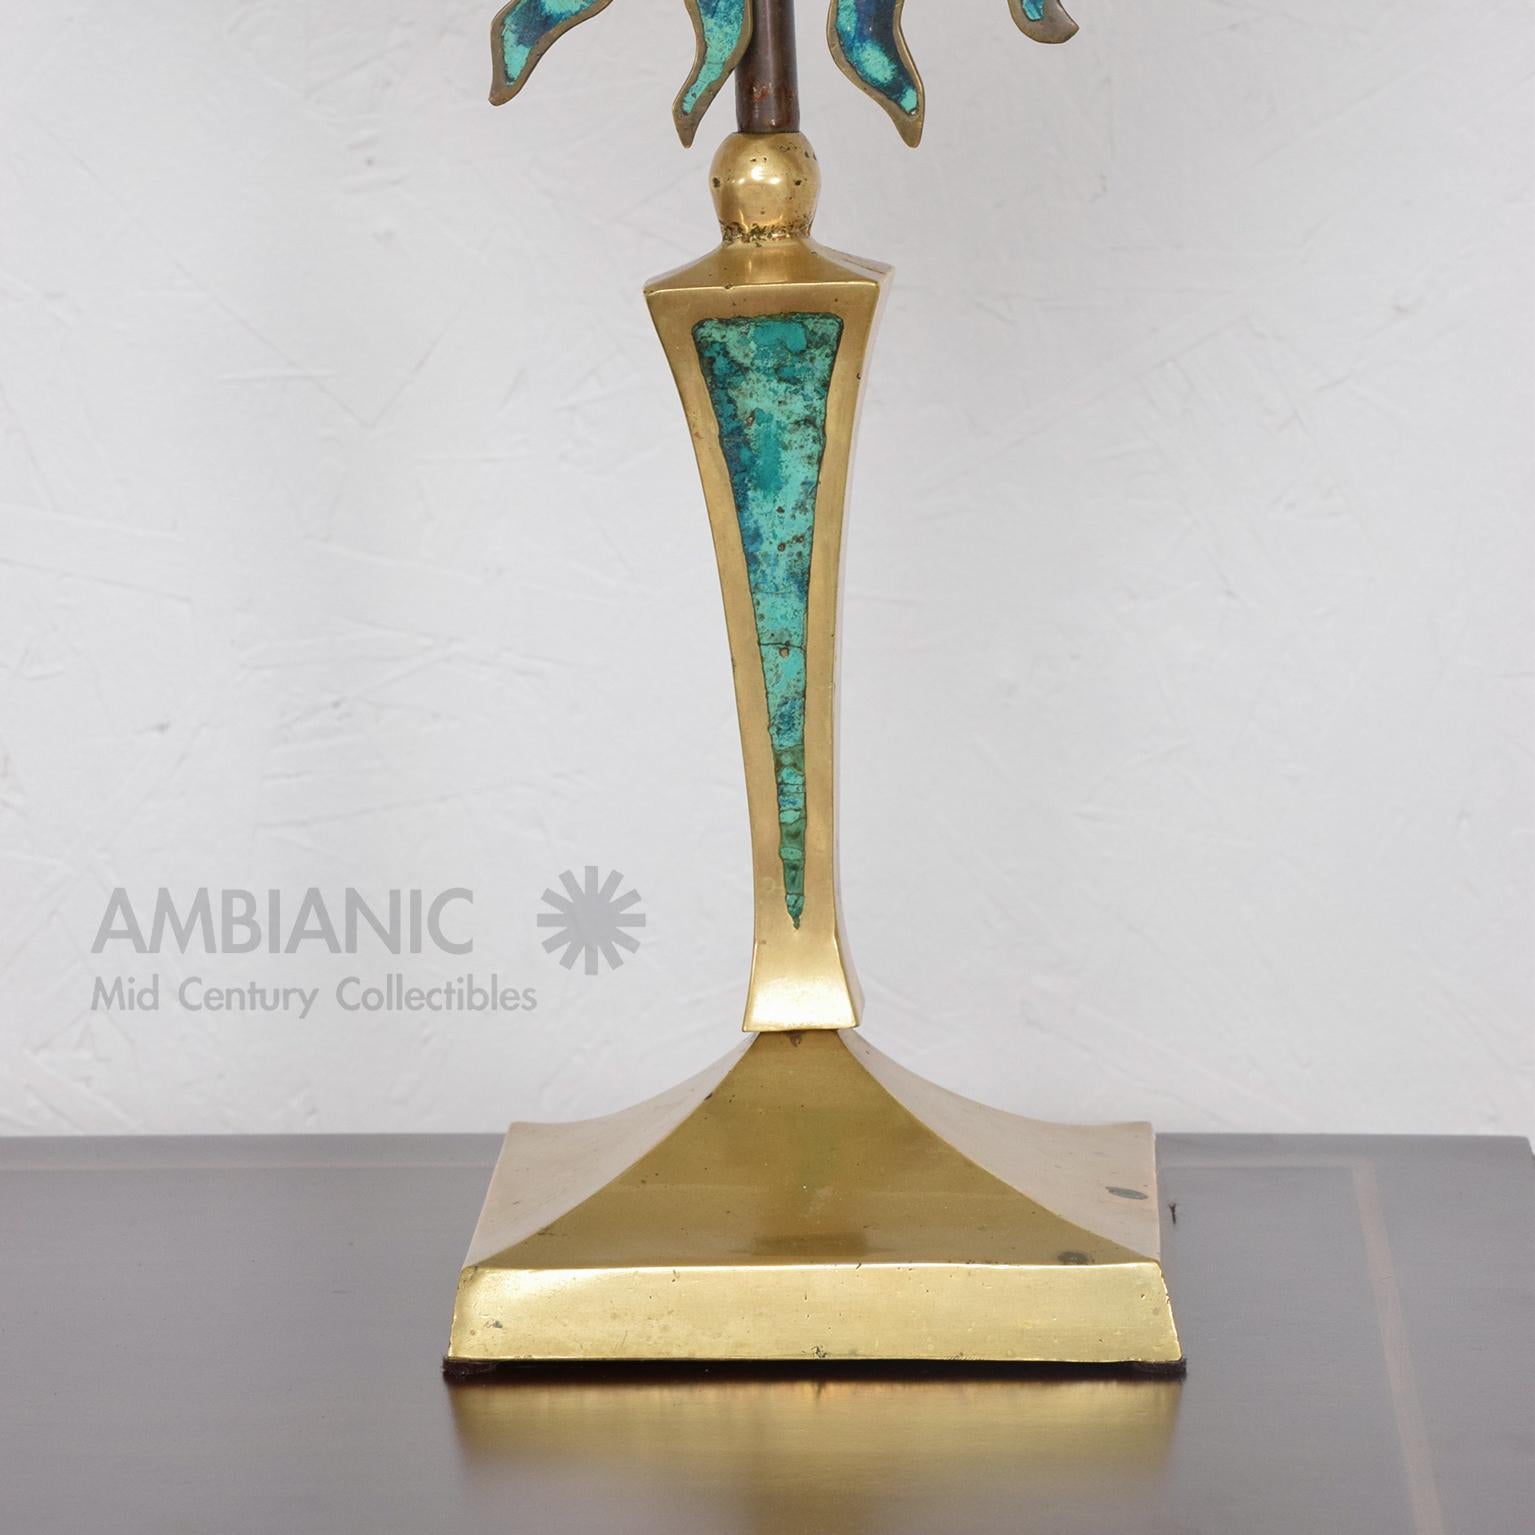 Table Lamps
Sculptor artist Pepe Mendoza SUN Sculpture Table Lamps crafted in Brass Bronze and Malachite. Mexico 1950s.
23 Tall x 8.75 W x 3.75 inches
Listing is for 2 lamps.
Original vintage unrestored condition with patina. Rewired. No shades are